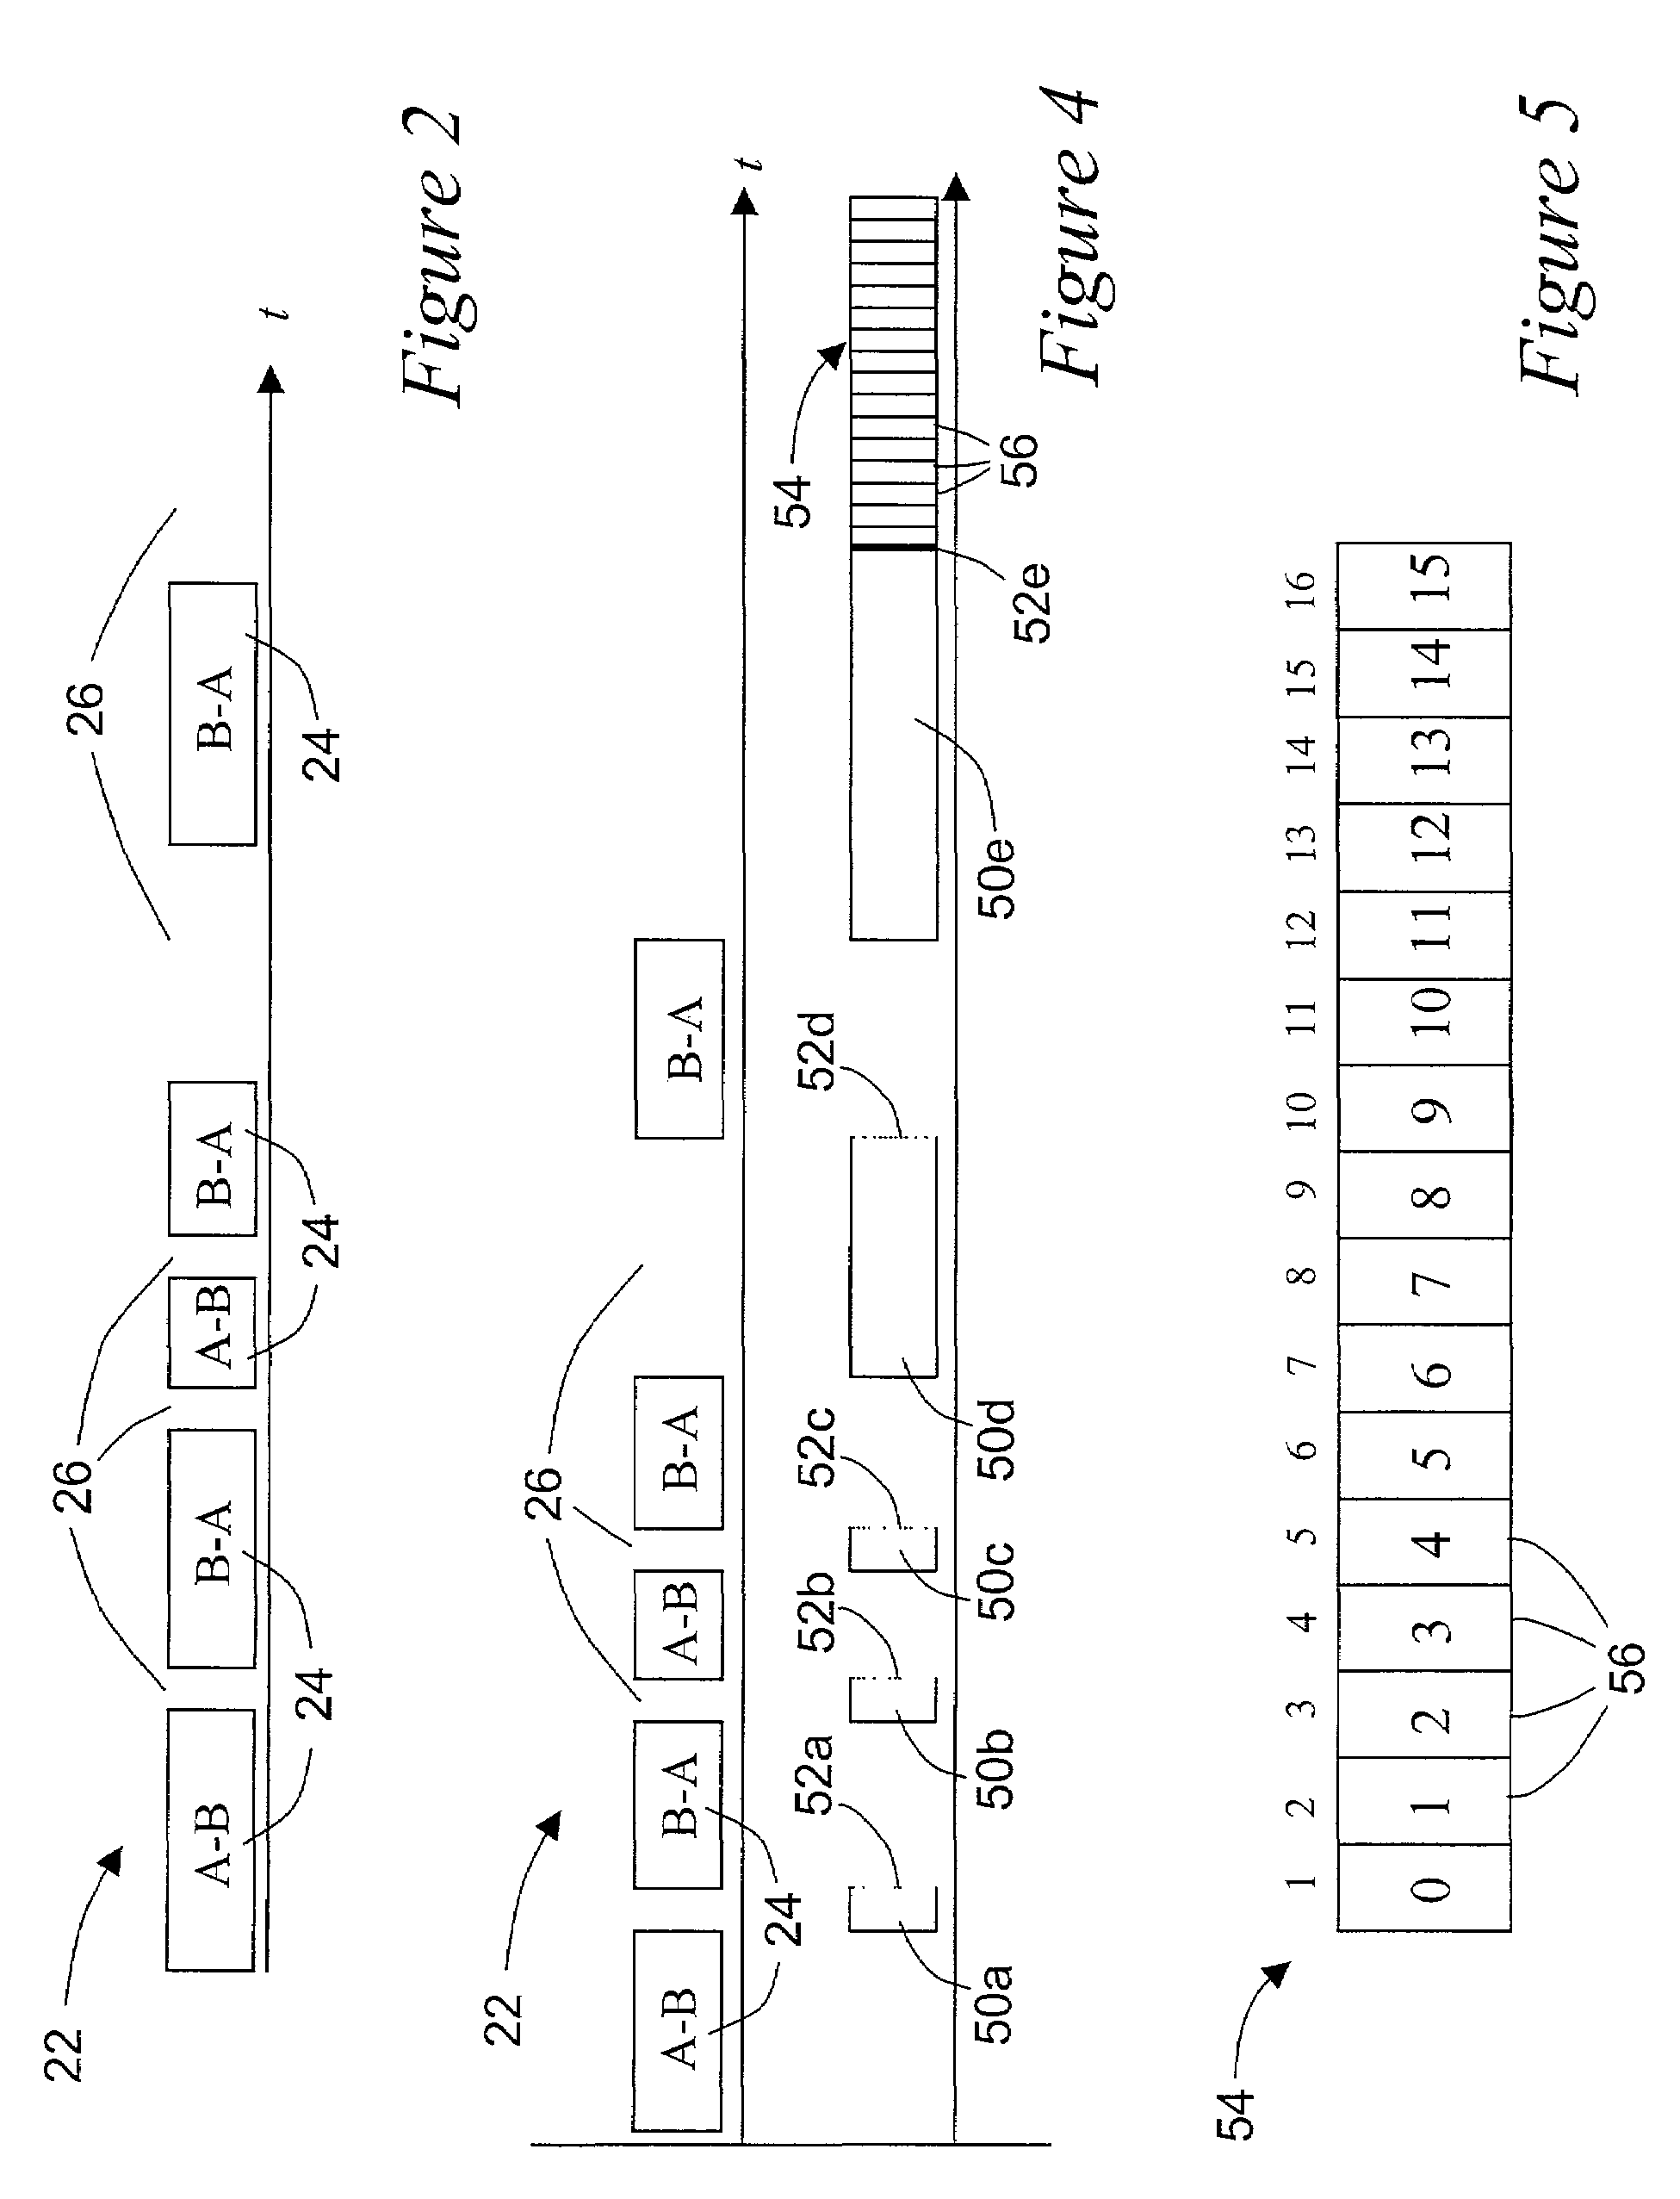 Method and system for data collision avoidance in a wireless communications system